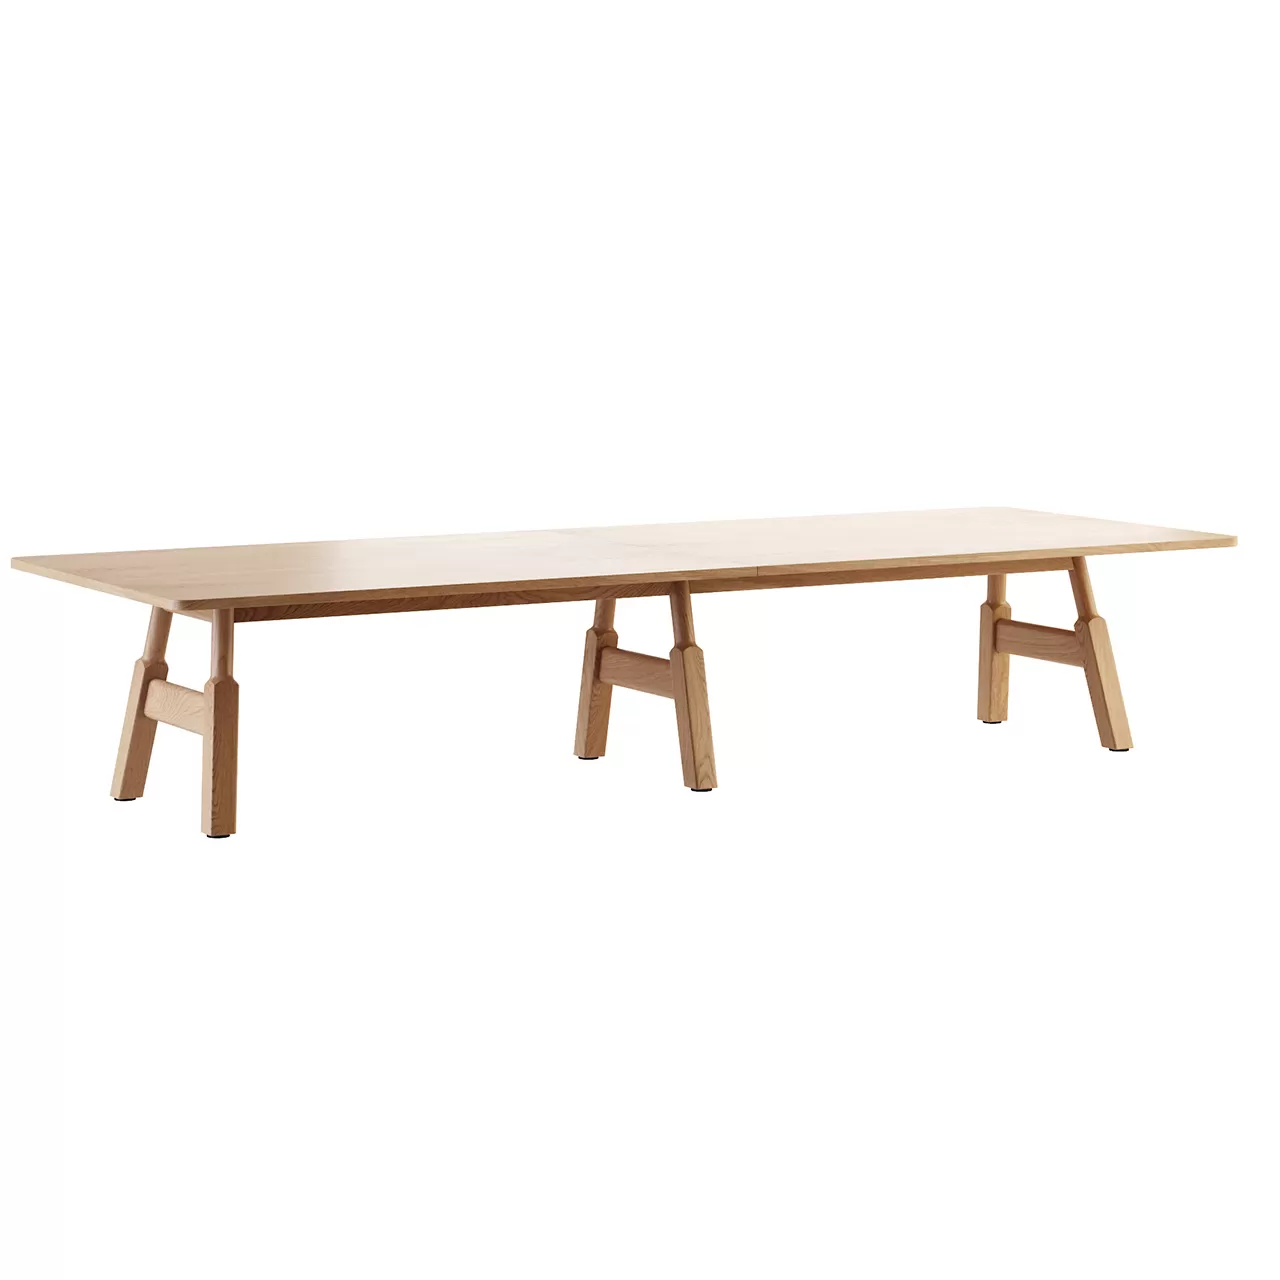 Furniture – WW1-380140-H73-Table-by-Karl-Andersson-Soner